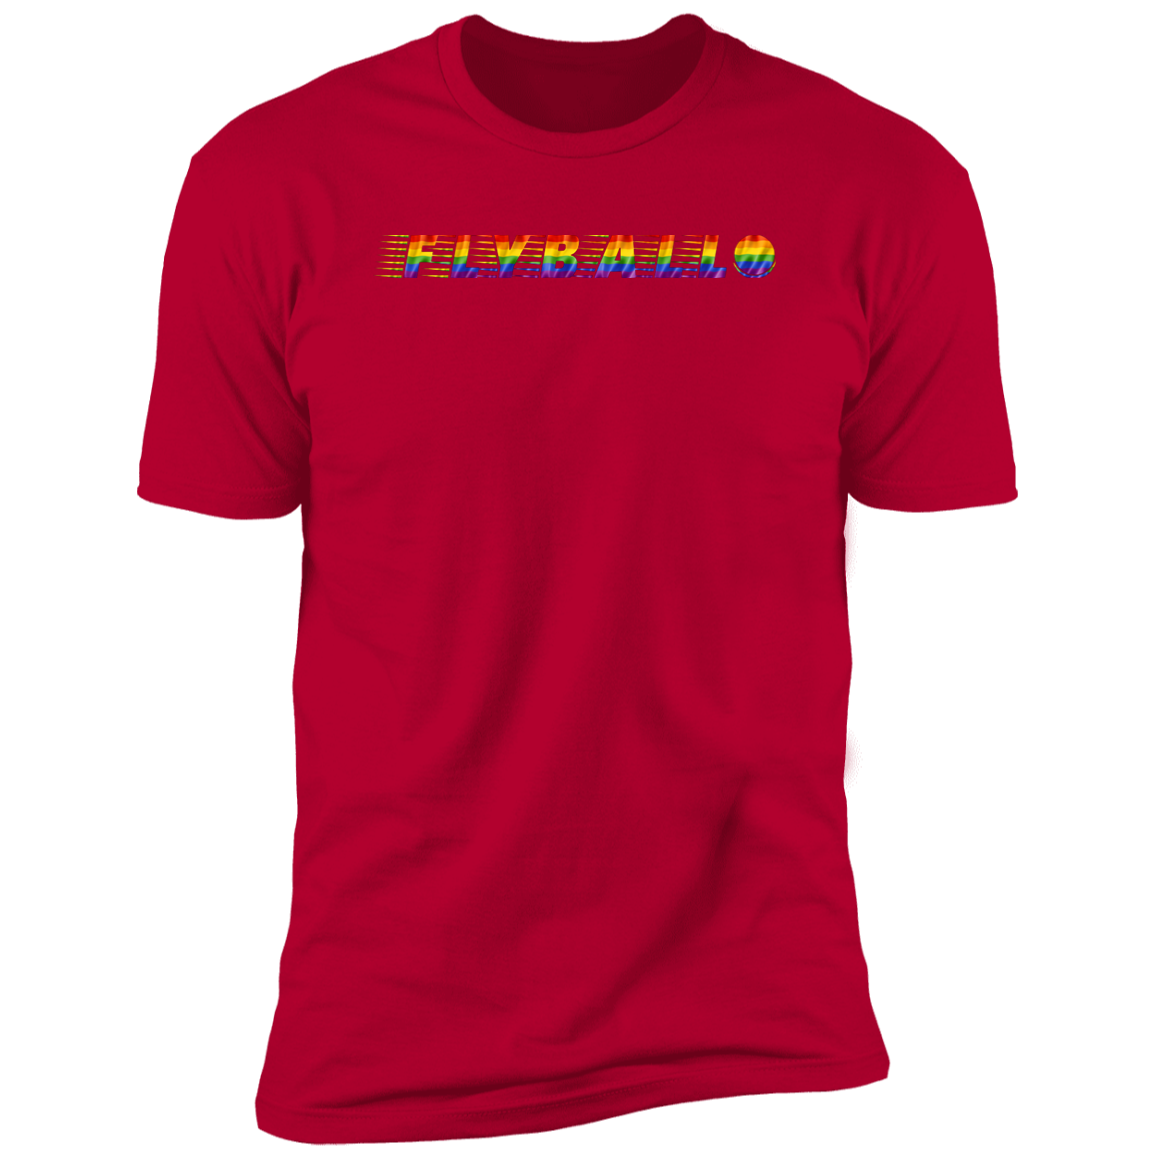 Flyball pride t-shirt, dog pride dog flyball shirt for humans, in red